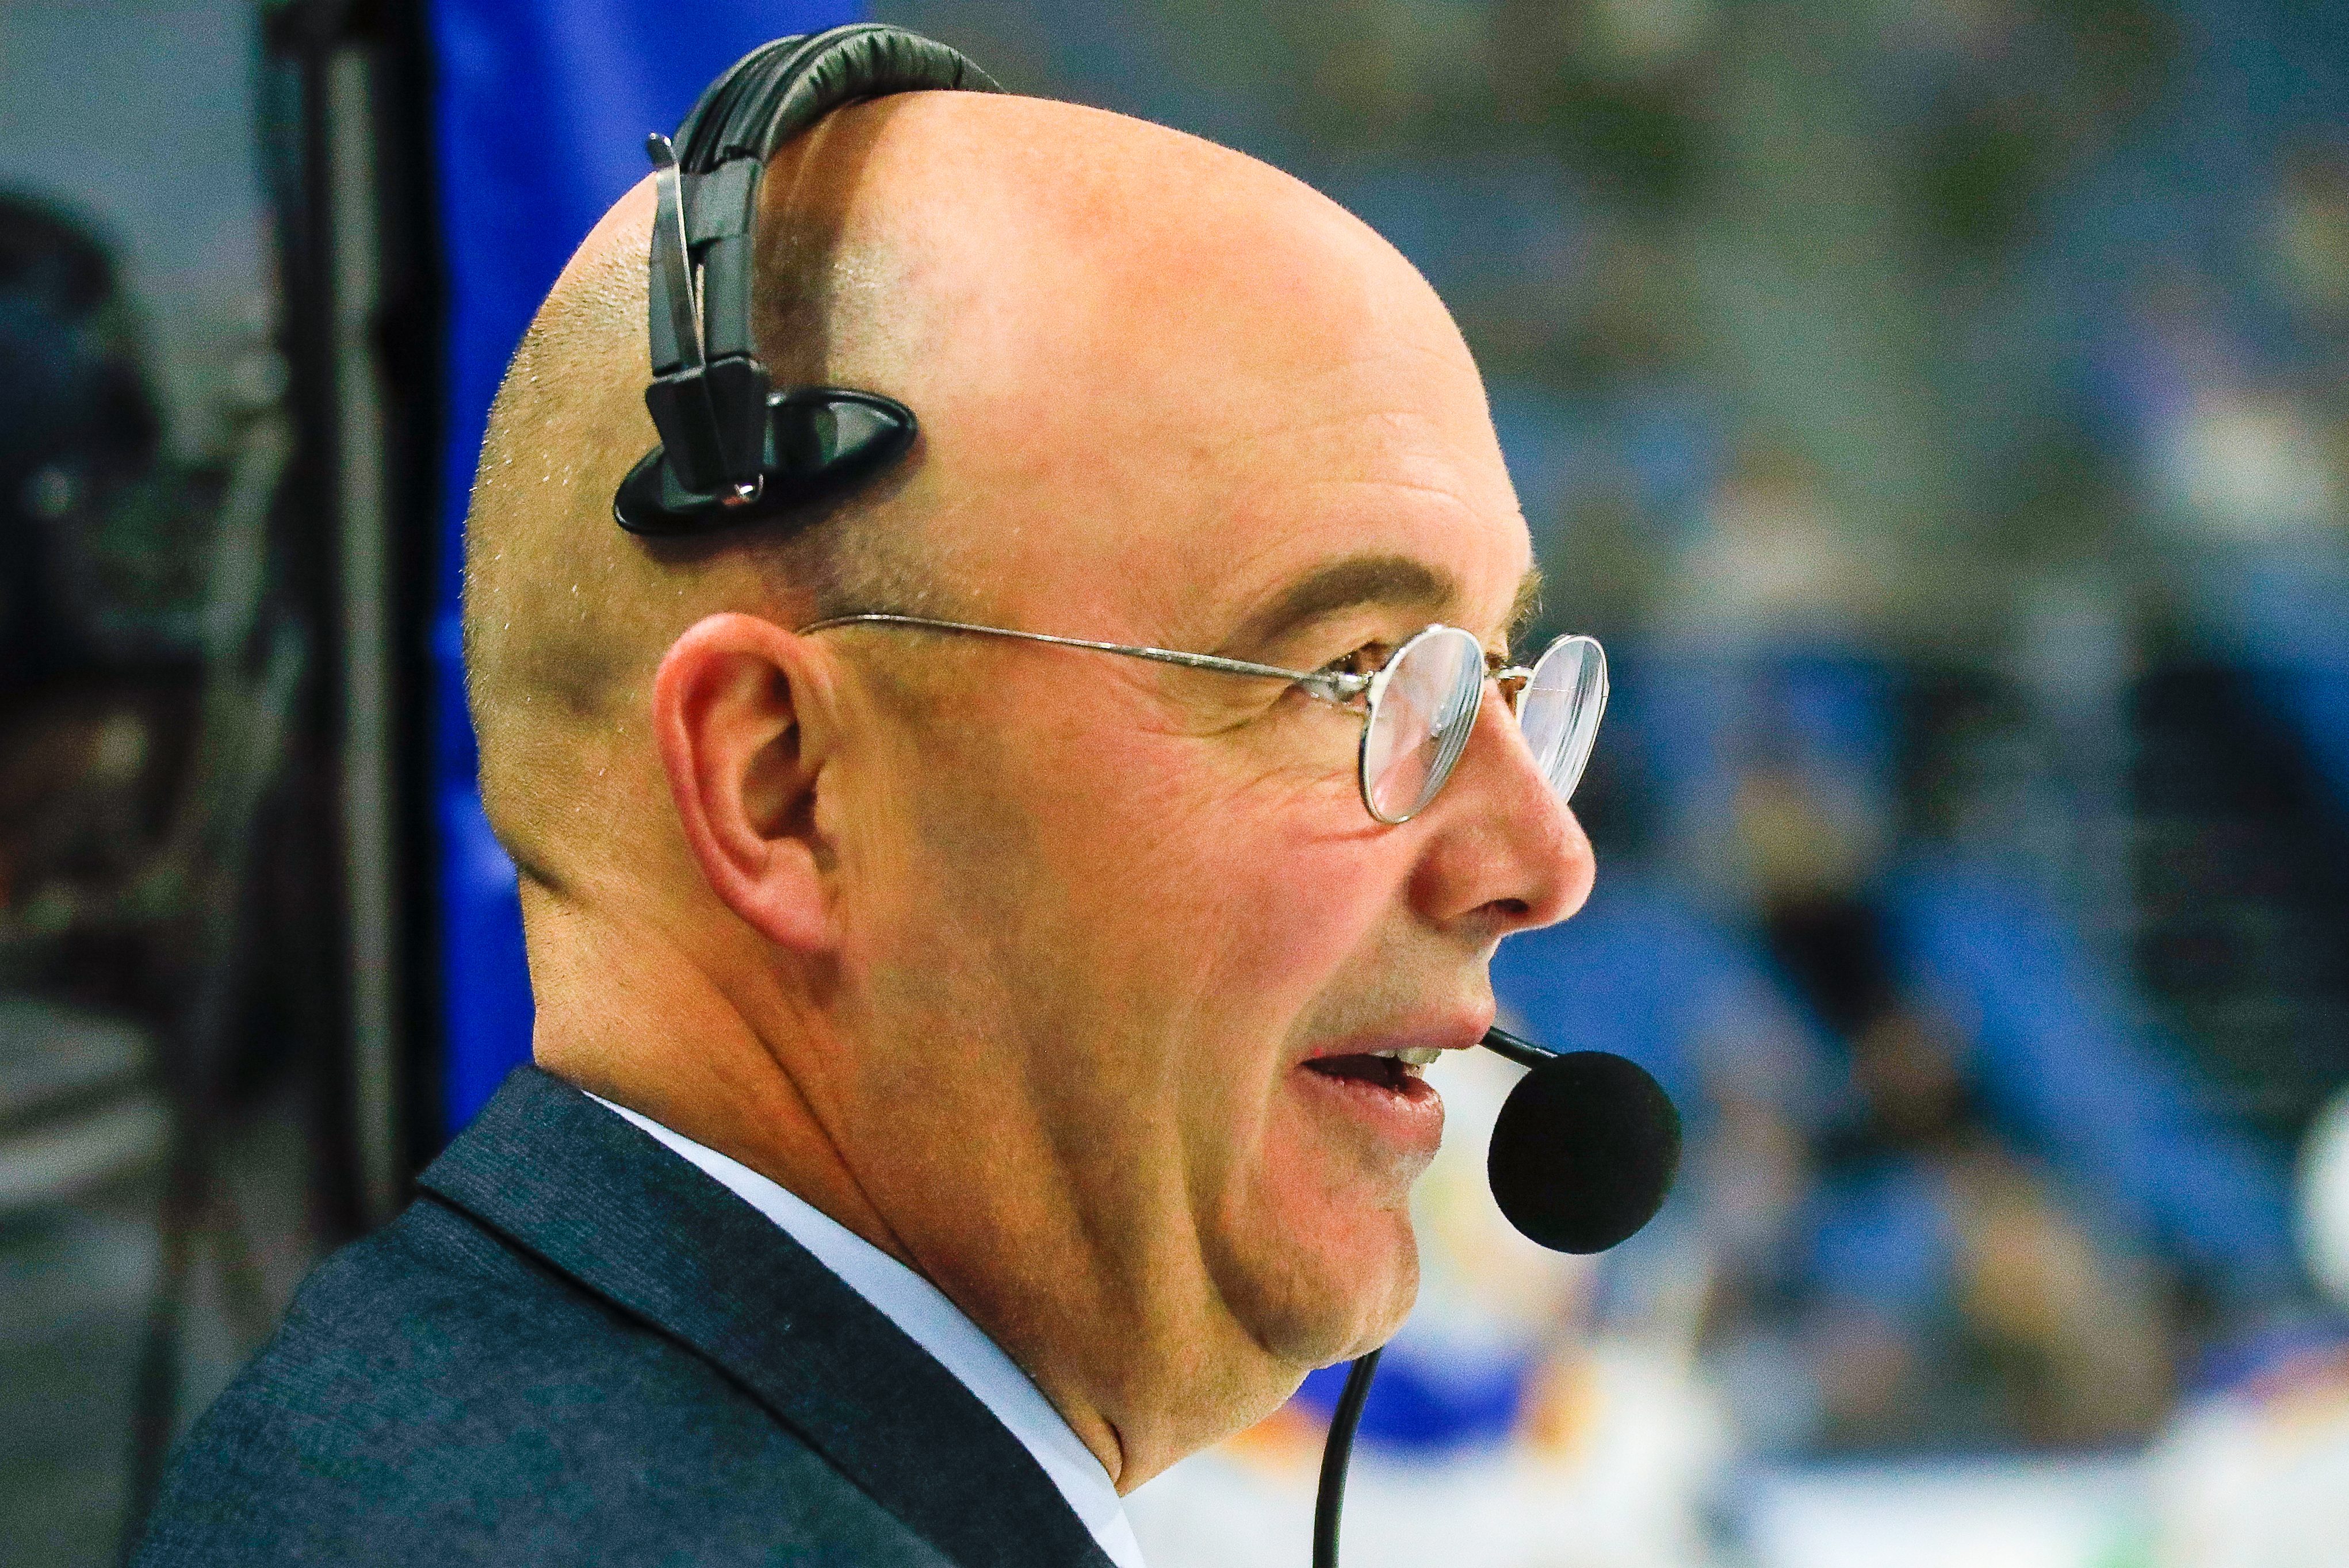 Hockey analyst Pierre McGuire wearing a mic. McGuire was recently appointed VP of player development for the Ottawa Senators.